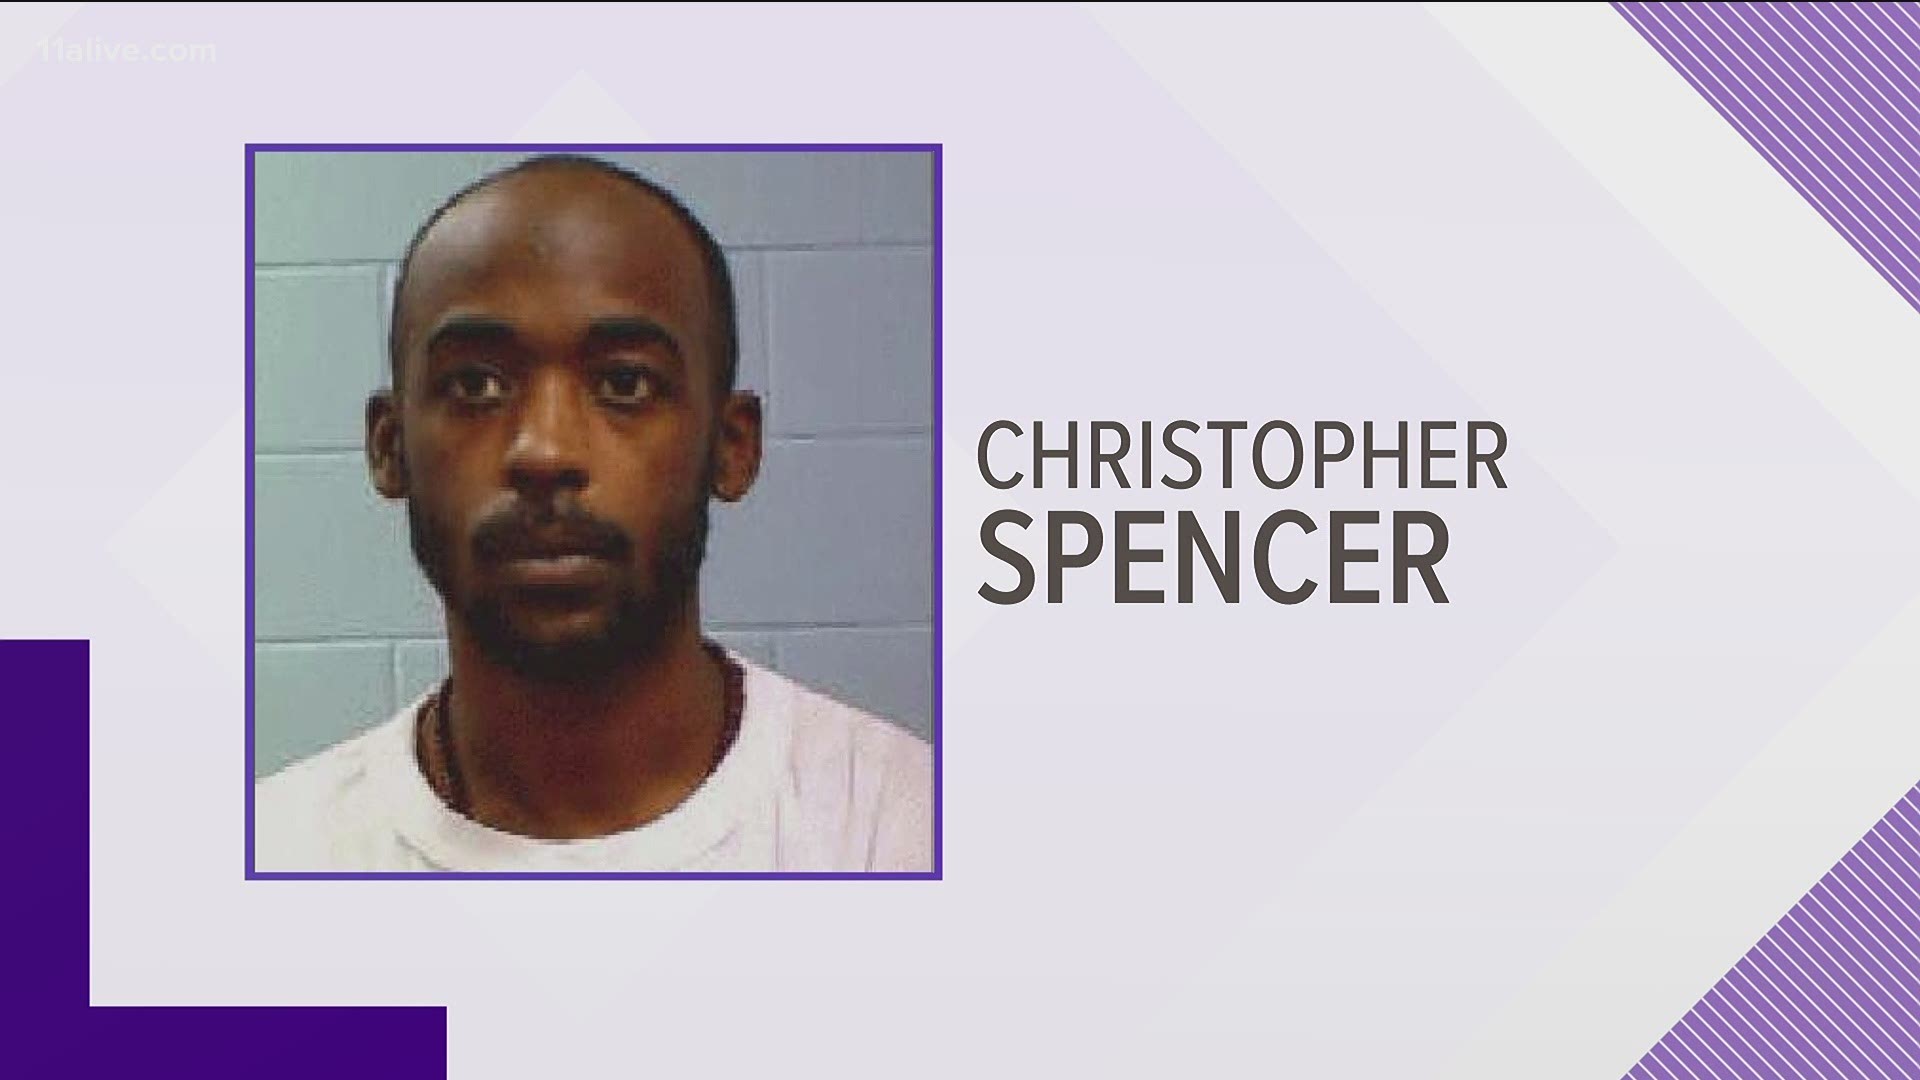 The victims included two children and a teenager. Christopher Spencer is serving a sentence of life in prison.